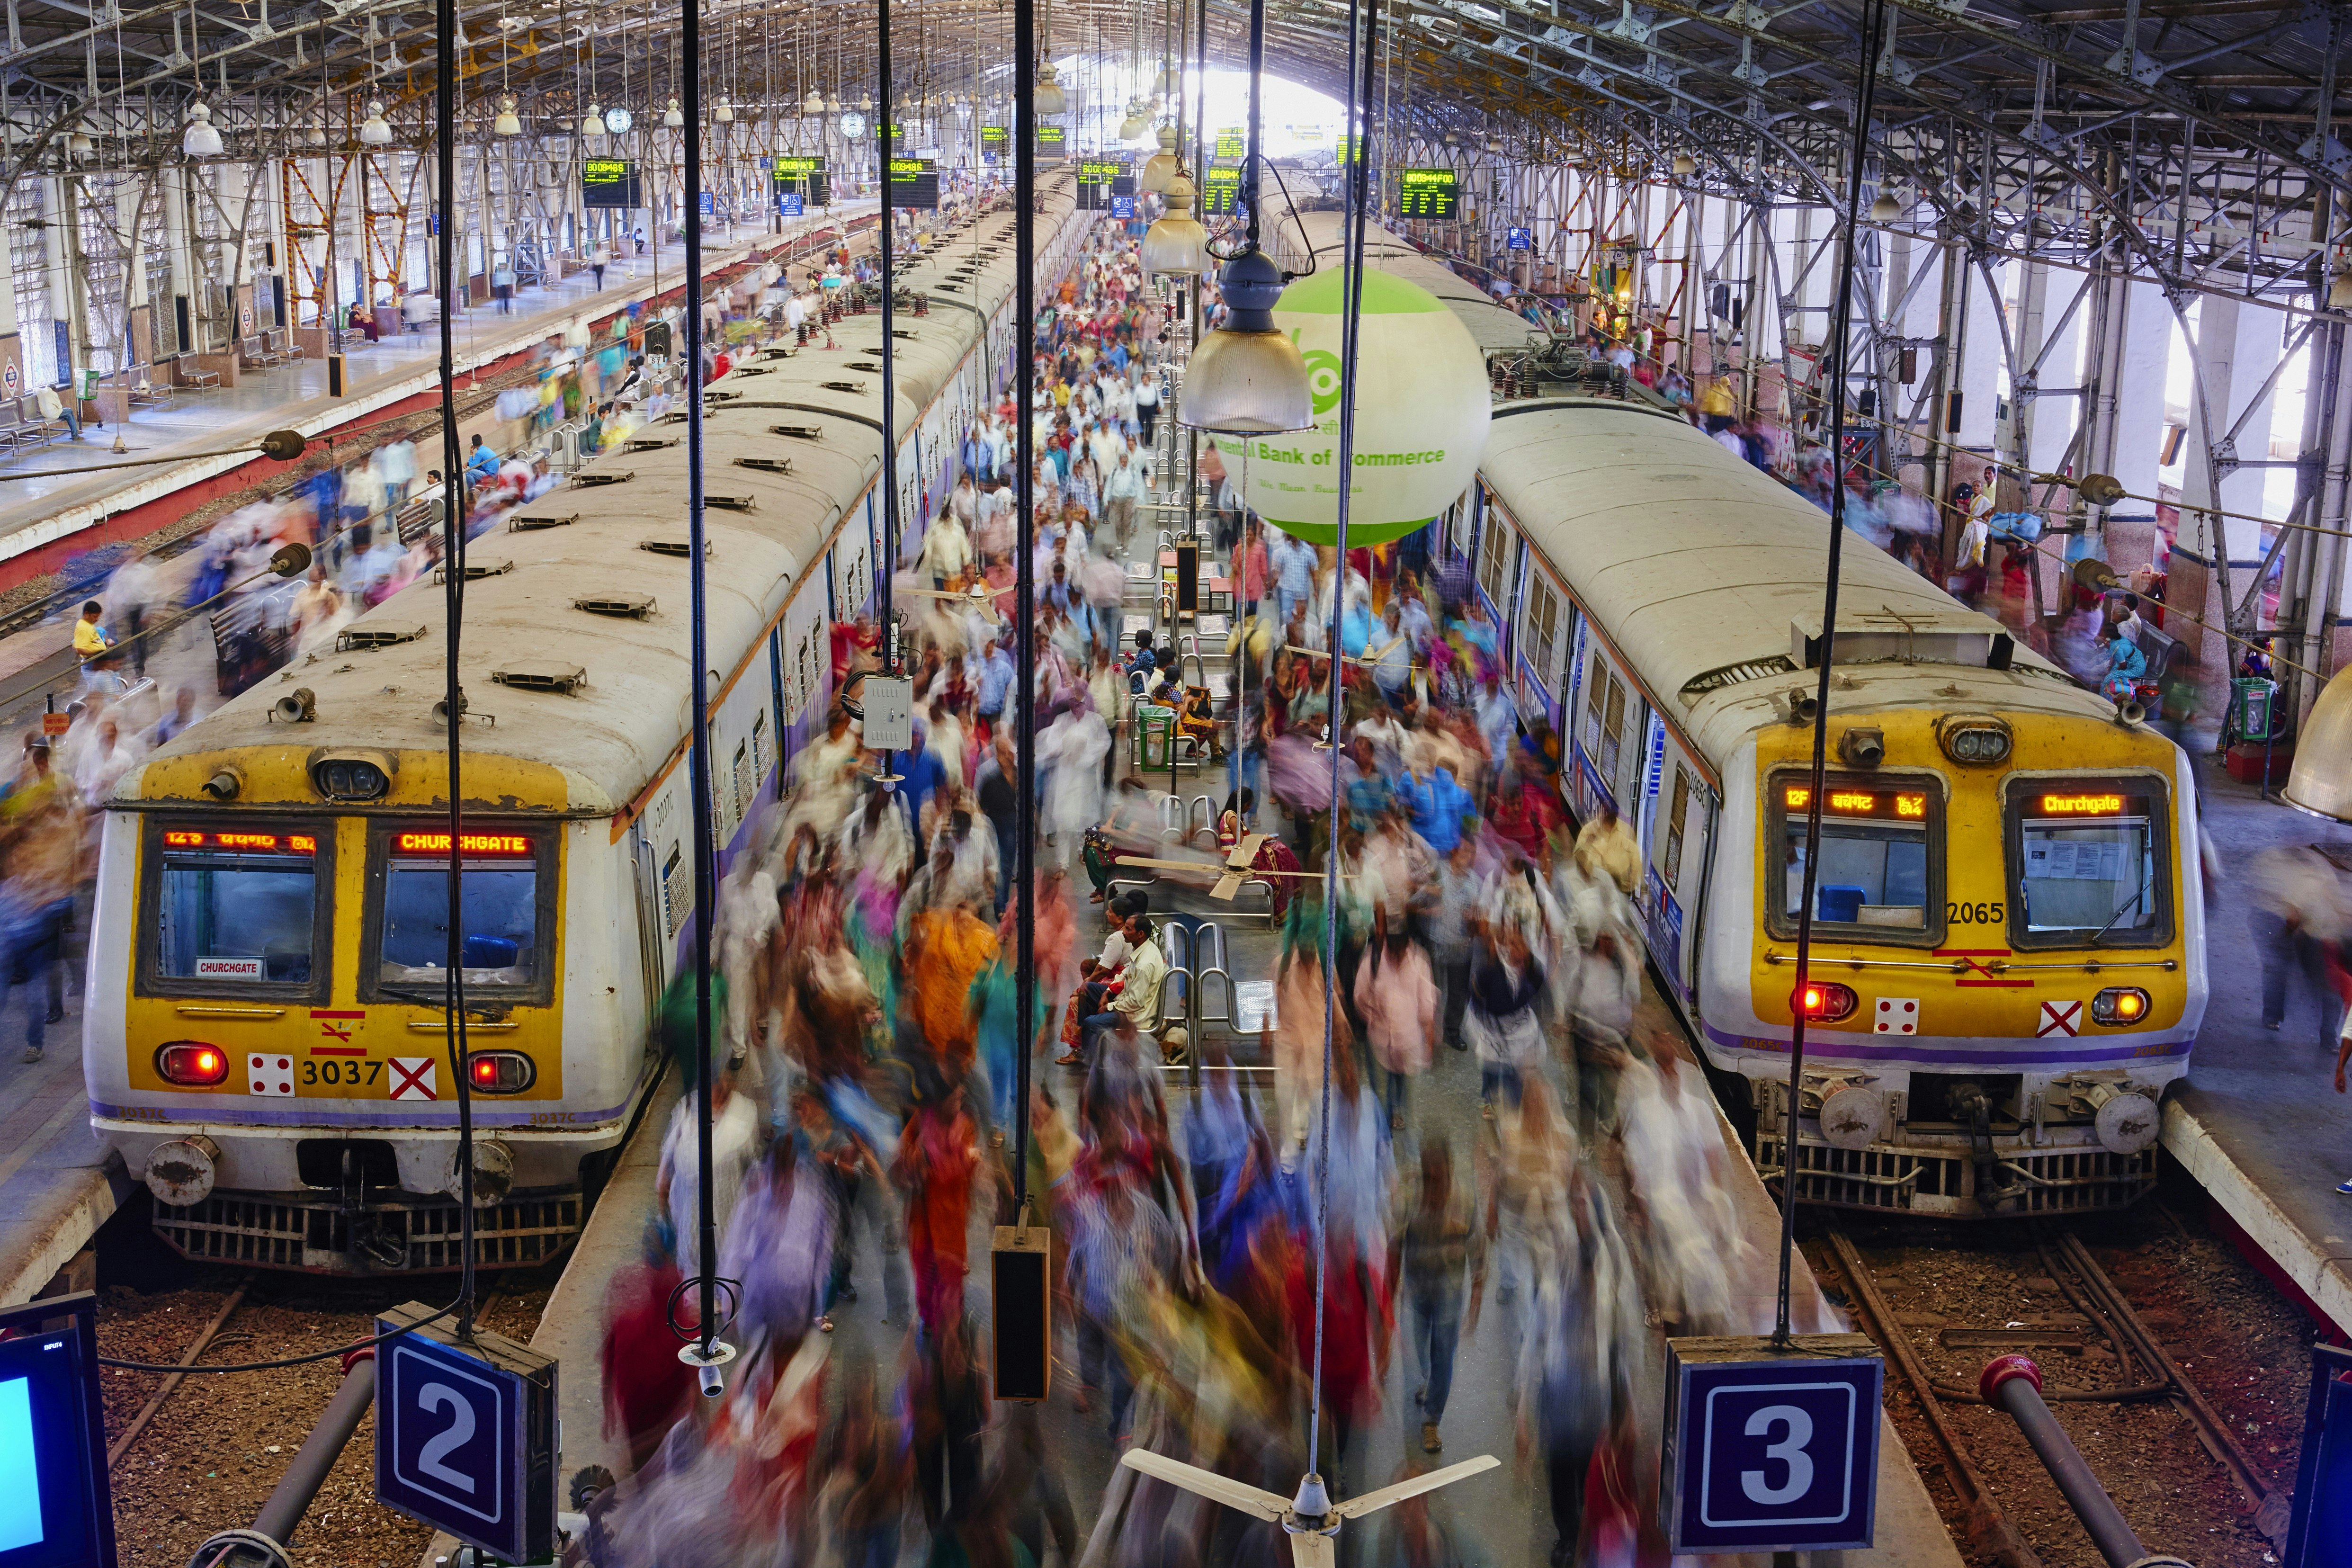 Blurred crowds of people - implying movement - walk along one of the platforms in Chhatrapati Shivaji Terminus, Mumbai. The platform is flanked on either side by trains.